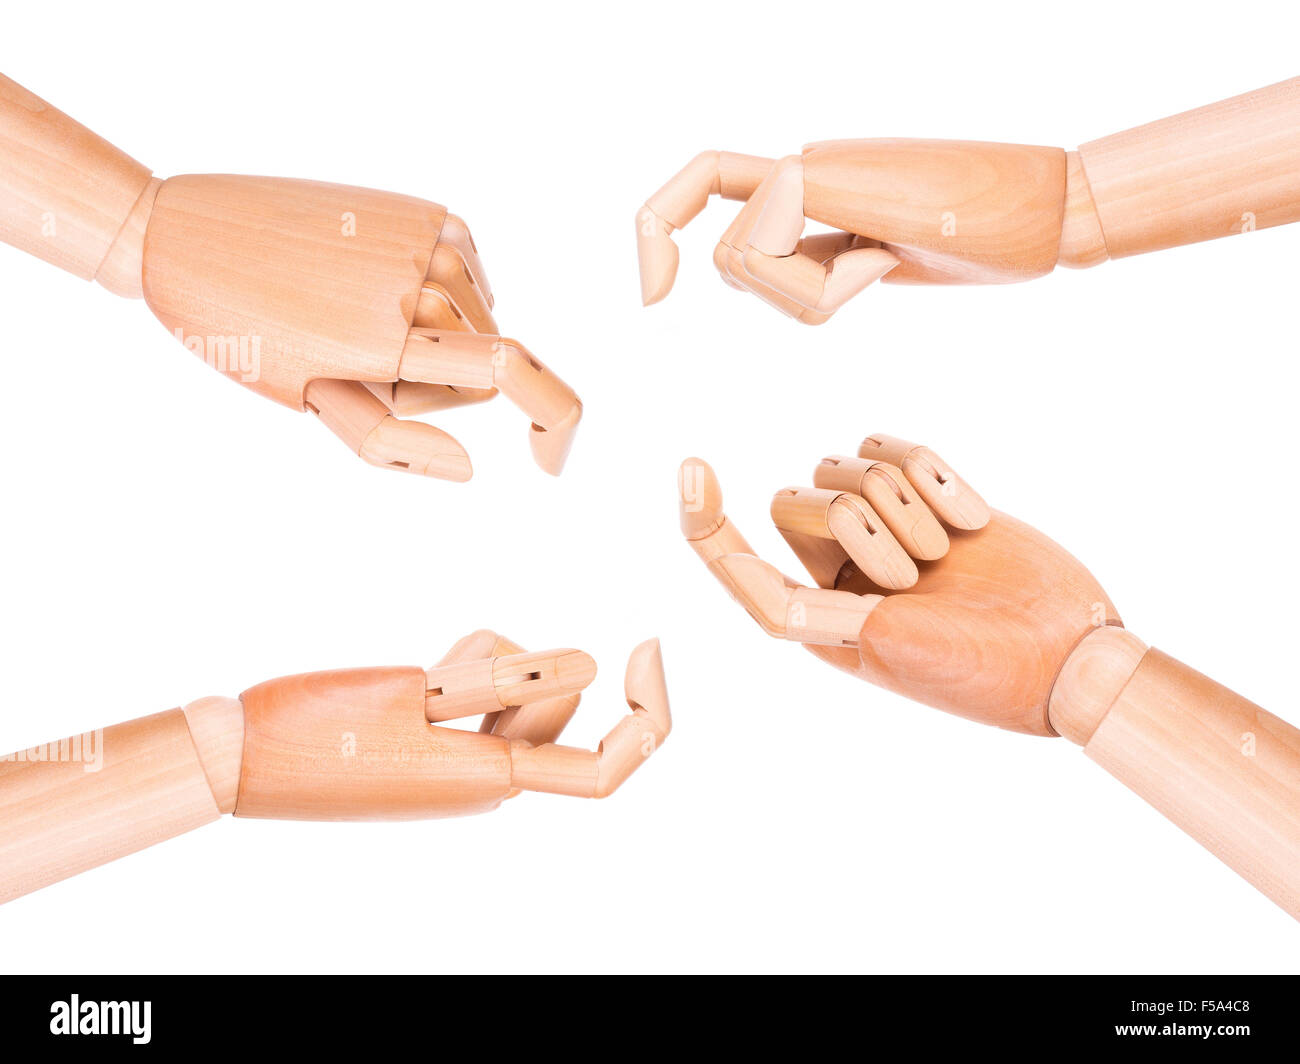 Wooden Mannequin Fake Hand Pointing Finger Up As To Ask A Question Stock  Photo, Picture and Royalty Free Image. Image 127919359.